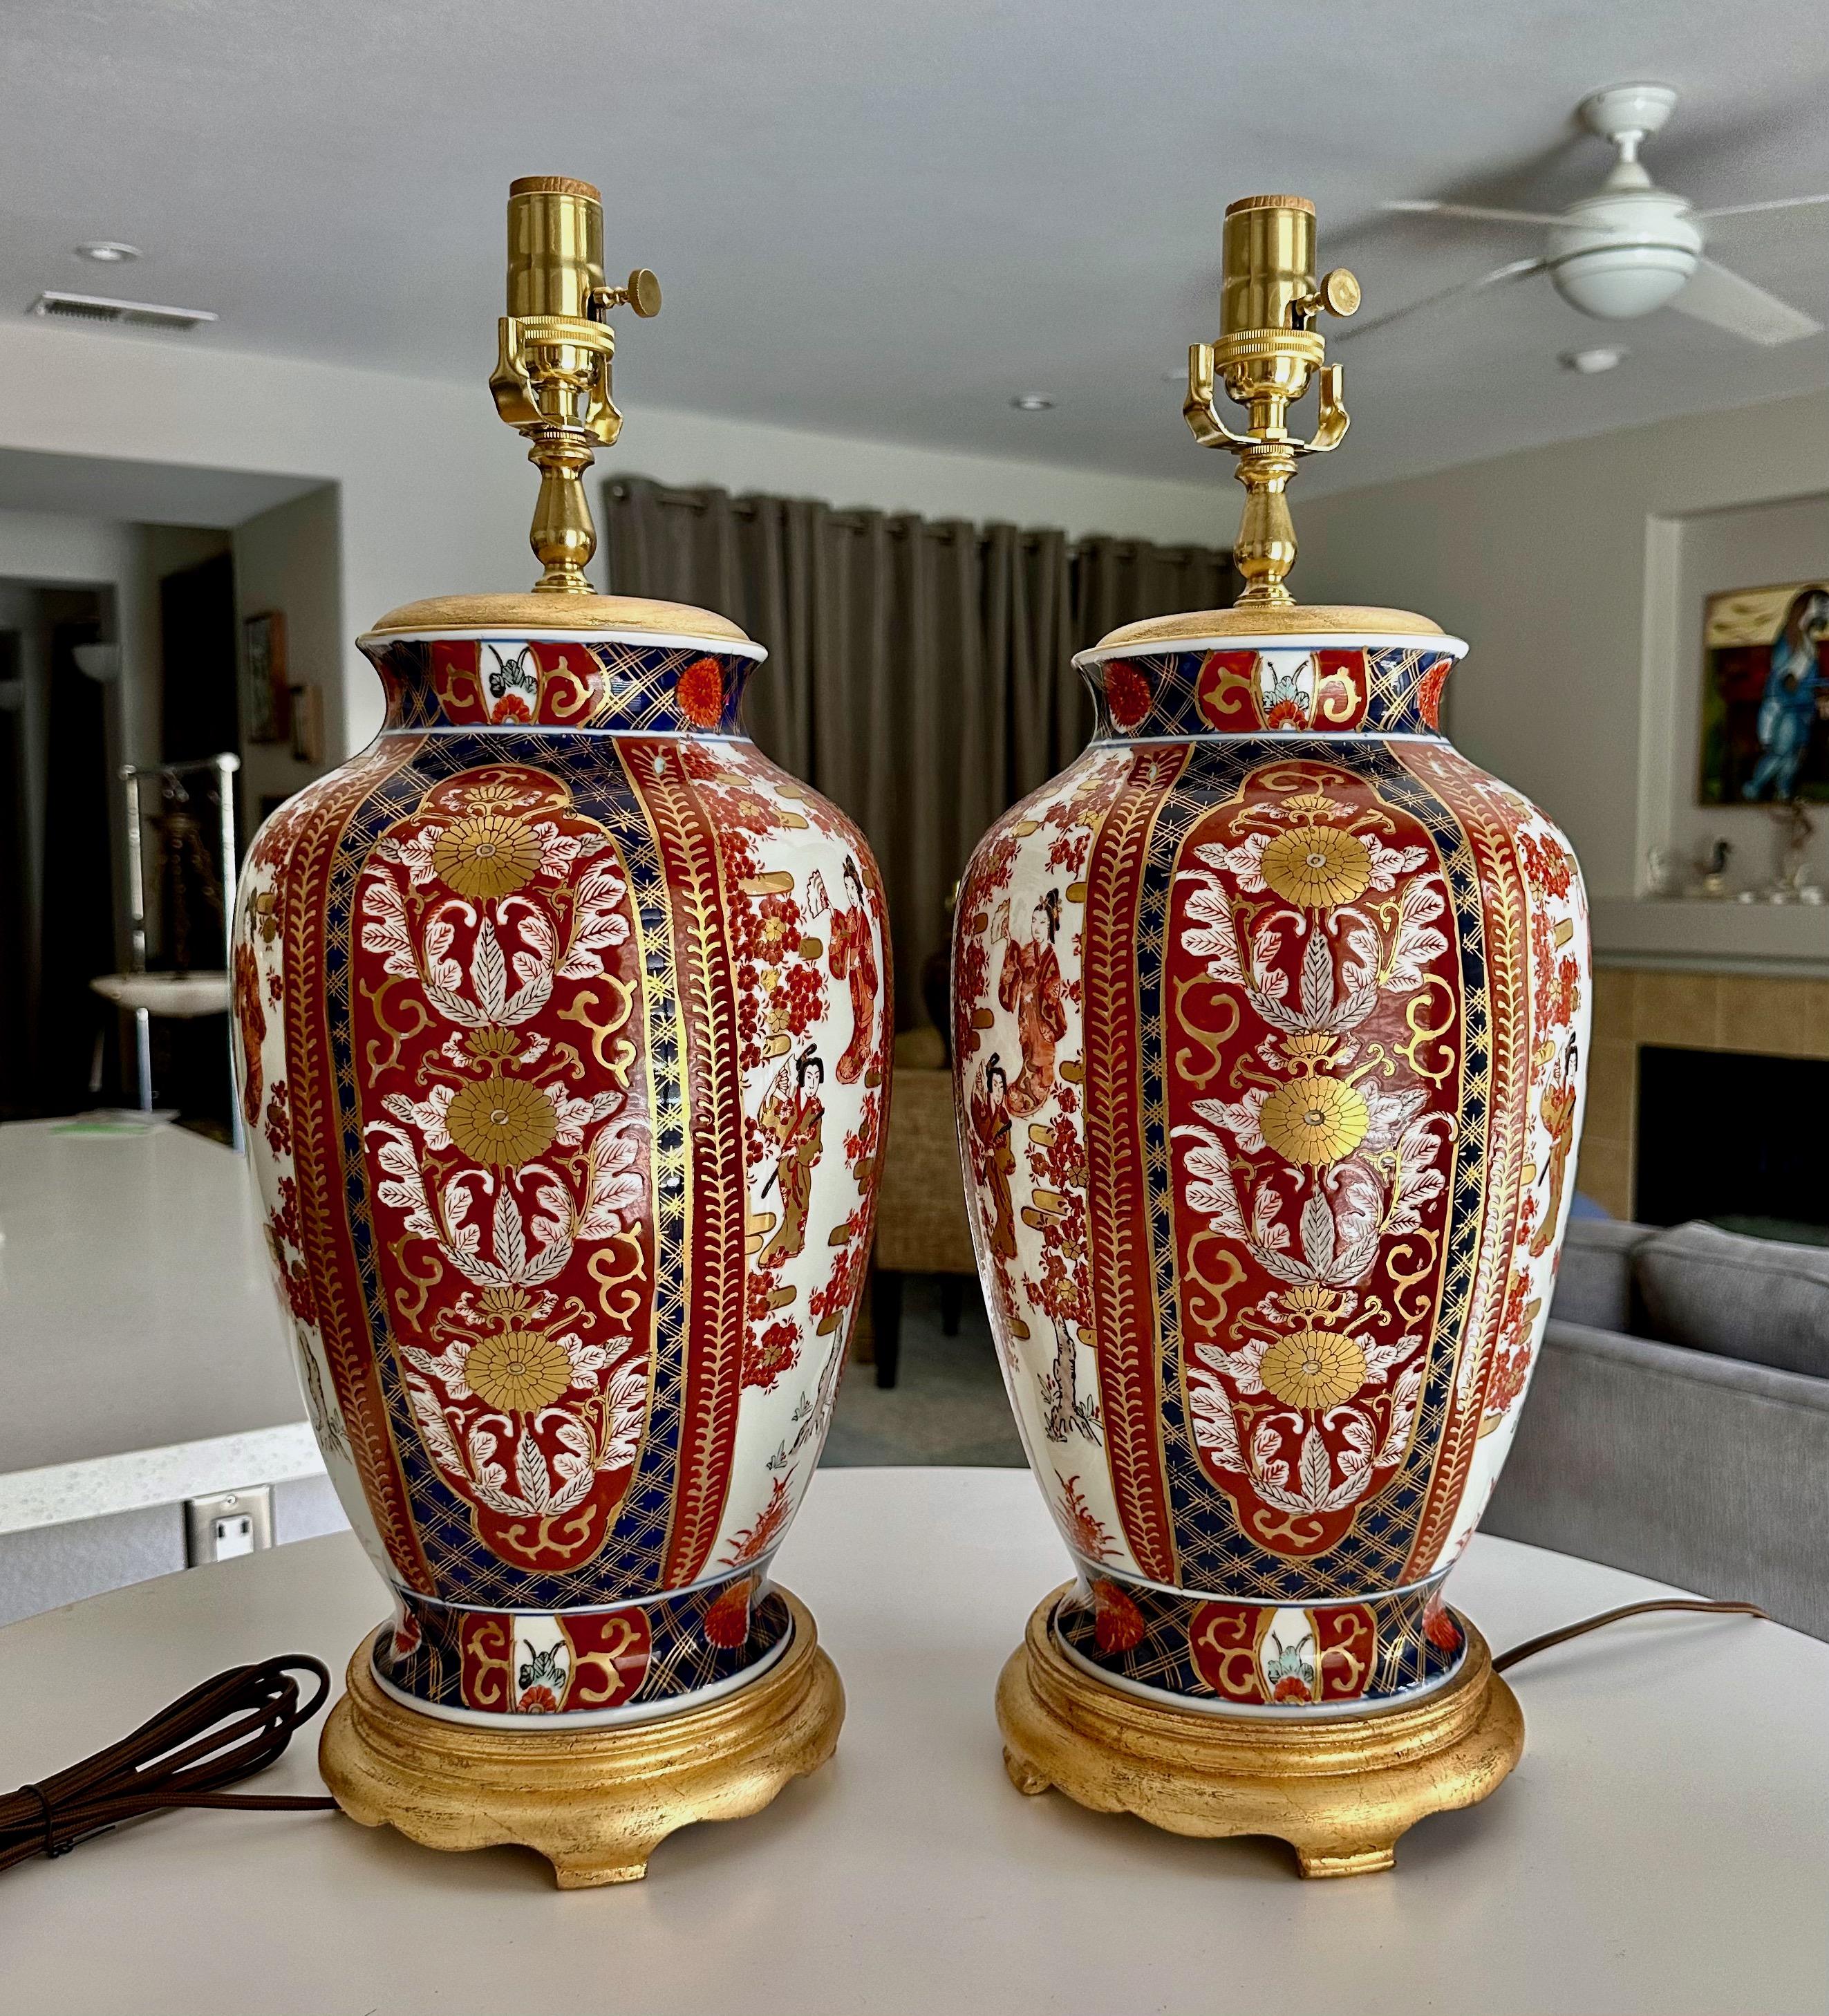 Pair of Japanese Imari porcelain vases mounted on giltwood bases, from the 50's 
possibly older unmarked. The colors are a rich burnt orange and dark blue with gold outlining, the design has figural images with classic flower and leaf motif. Newly